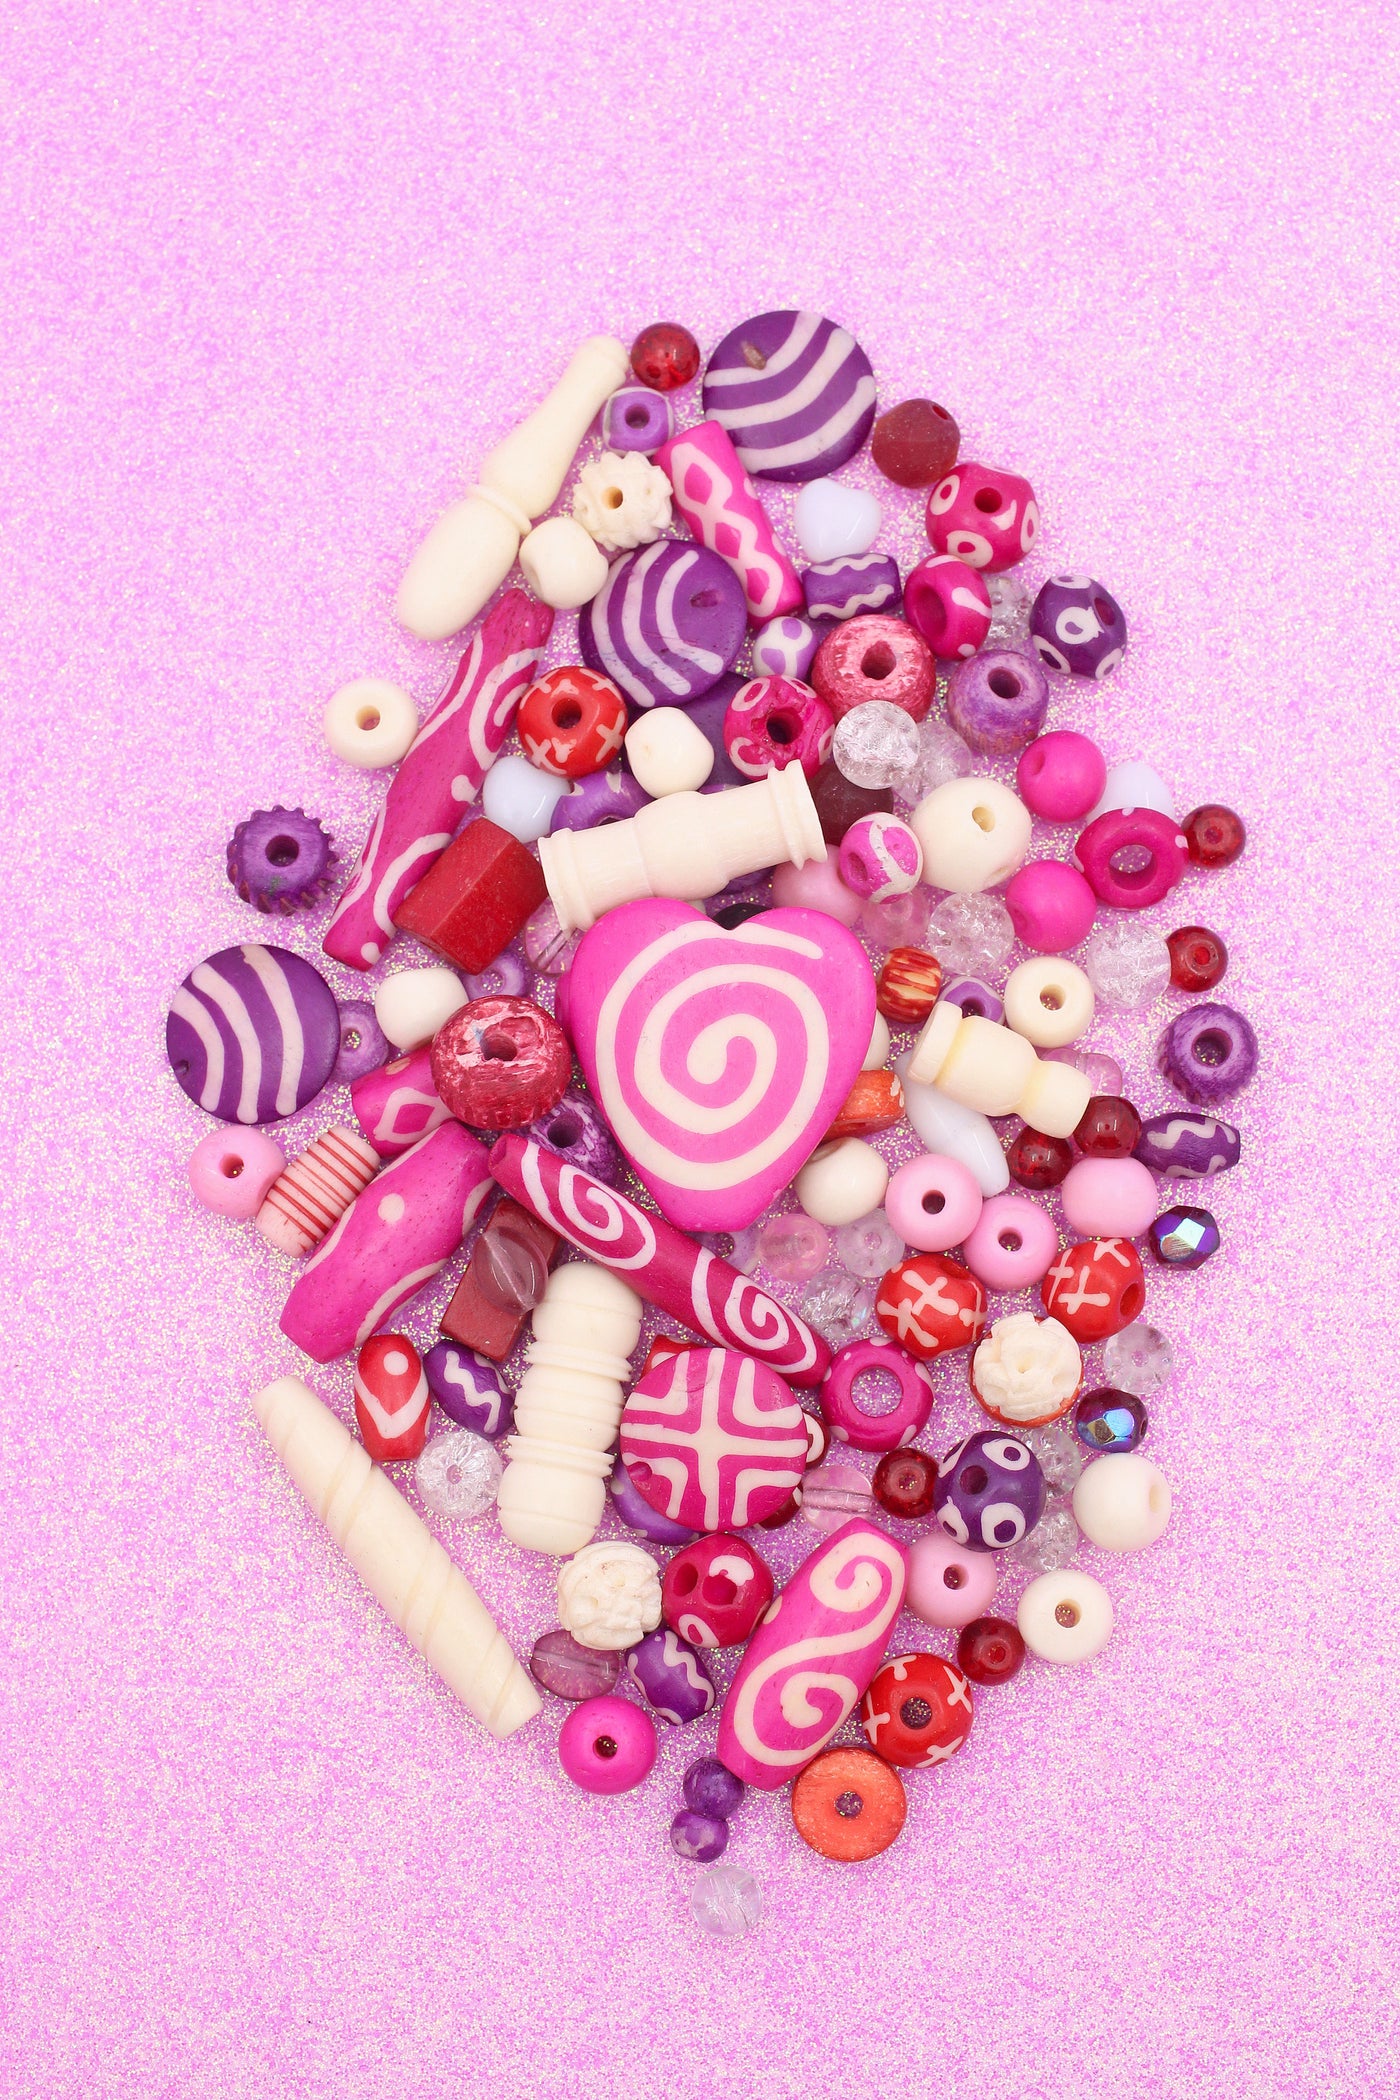 Valentine's Day Bead Grab Bag, Red, Pink, White, Purple Assortment for Galentine's event fun